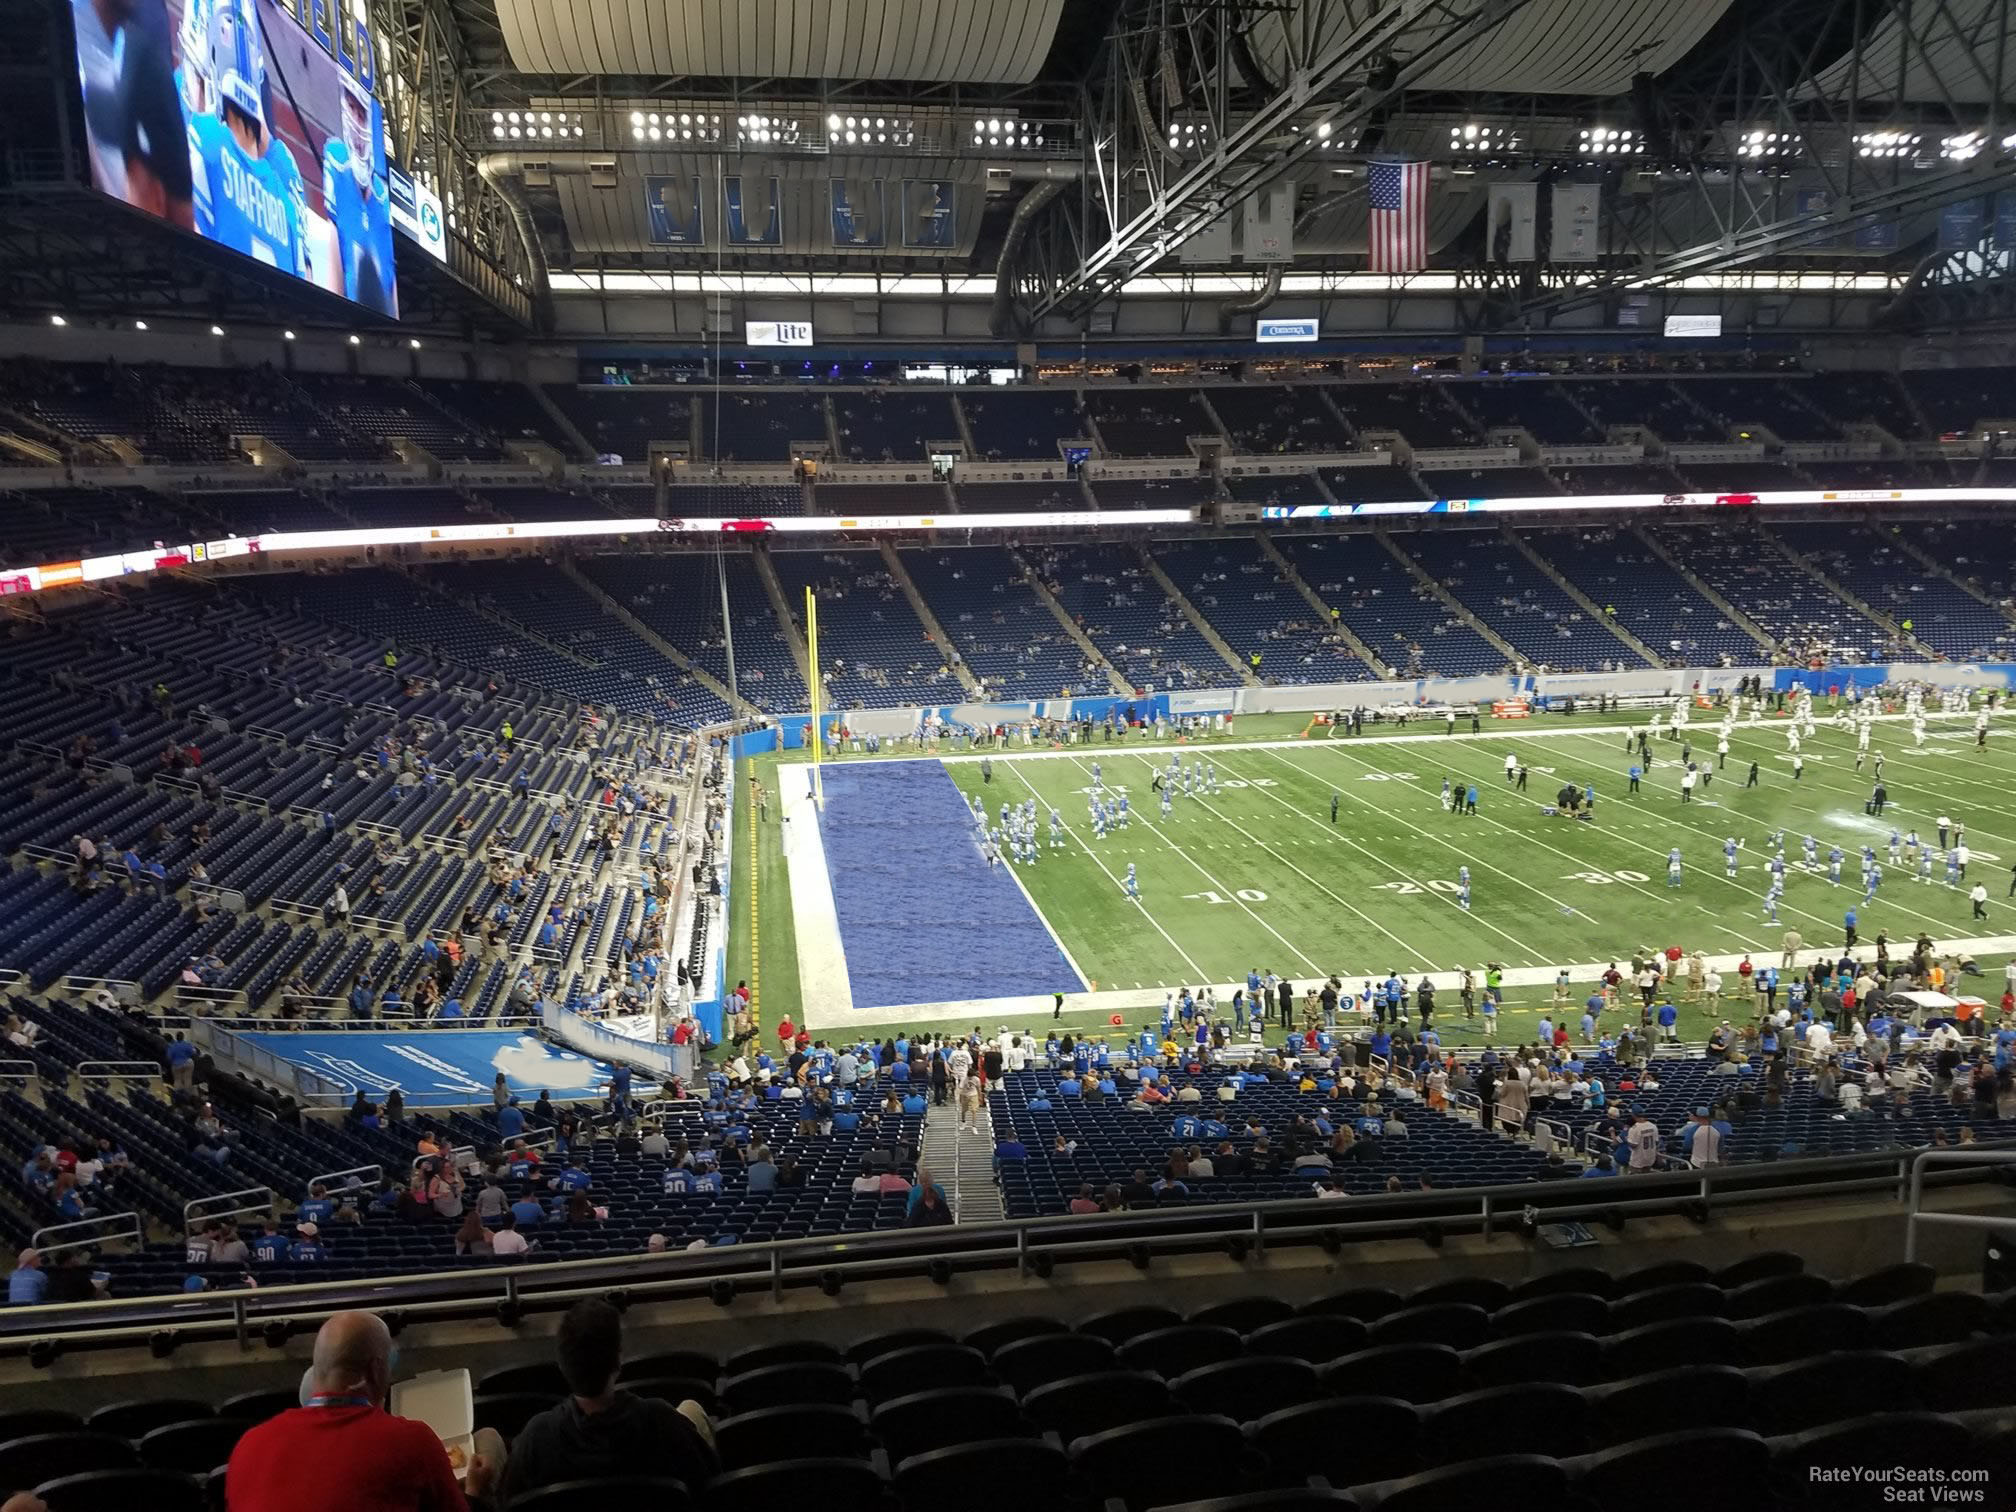 Section 202 at Ford Field - Detroit Lions - RateYourSeats.com